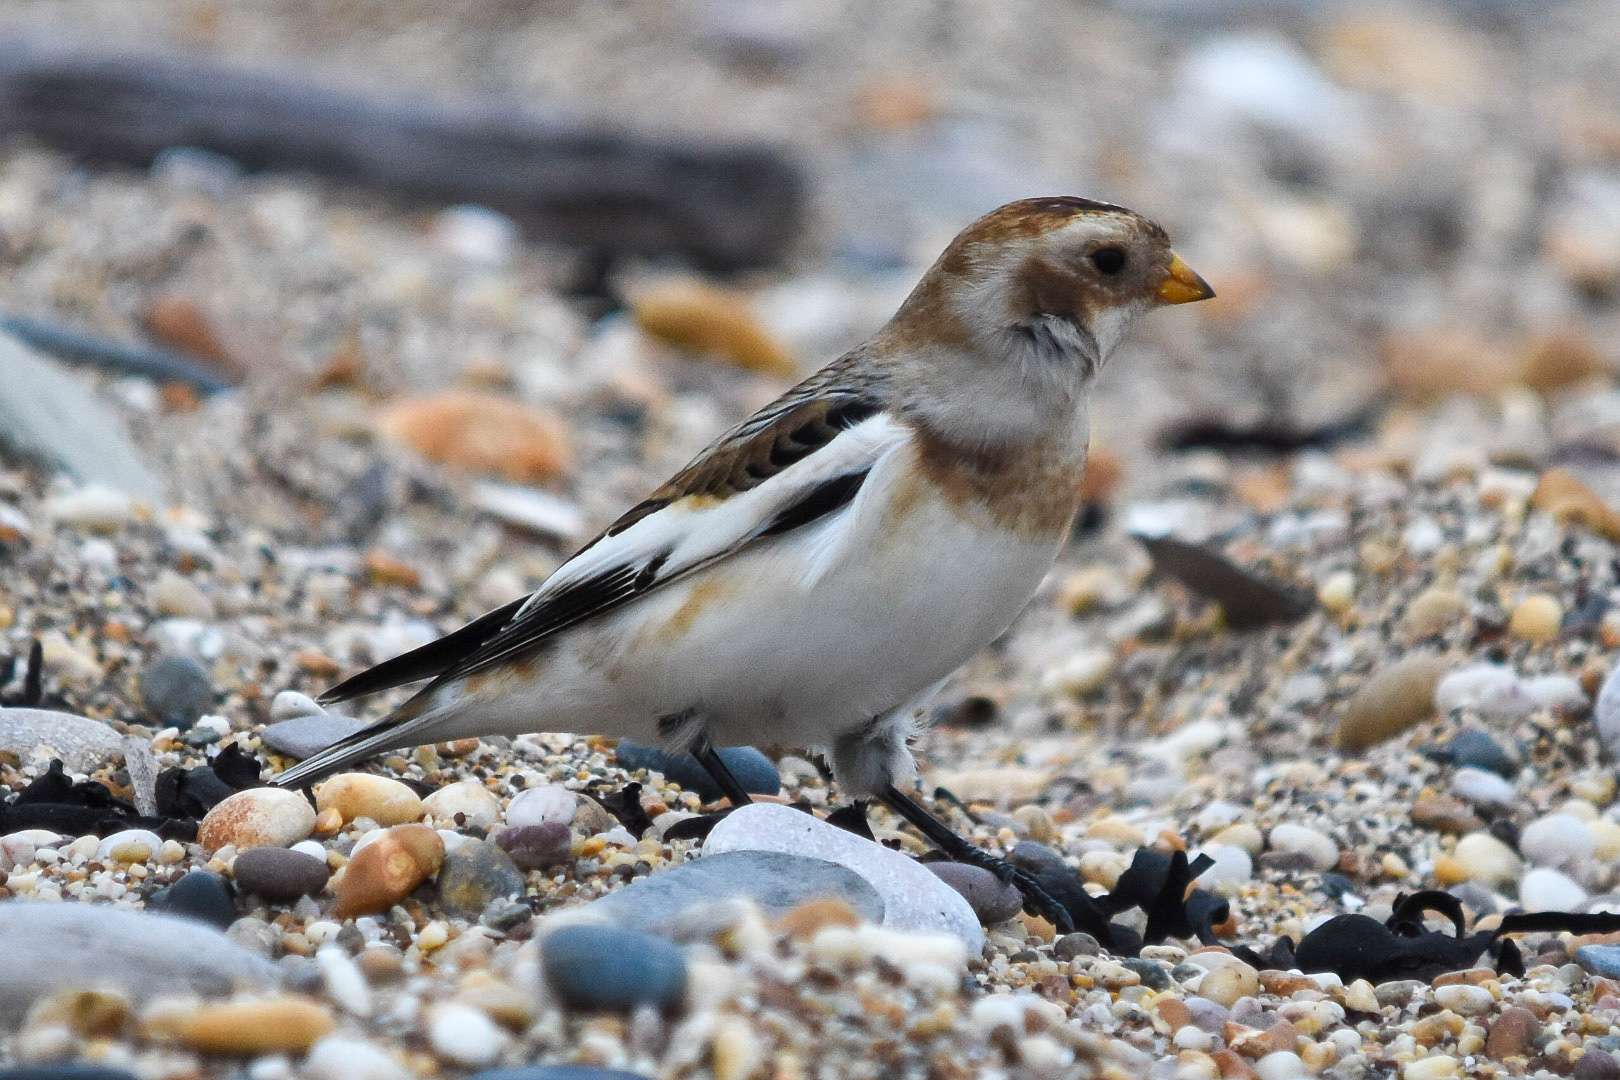 Snow Bunting by Duncan Leitch at Slapton